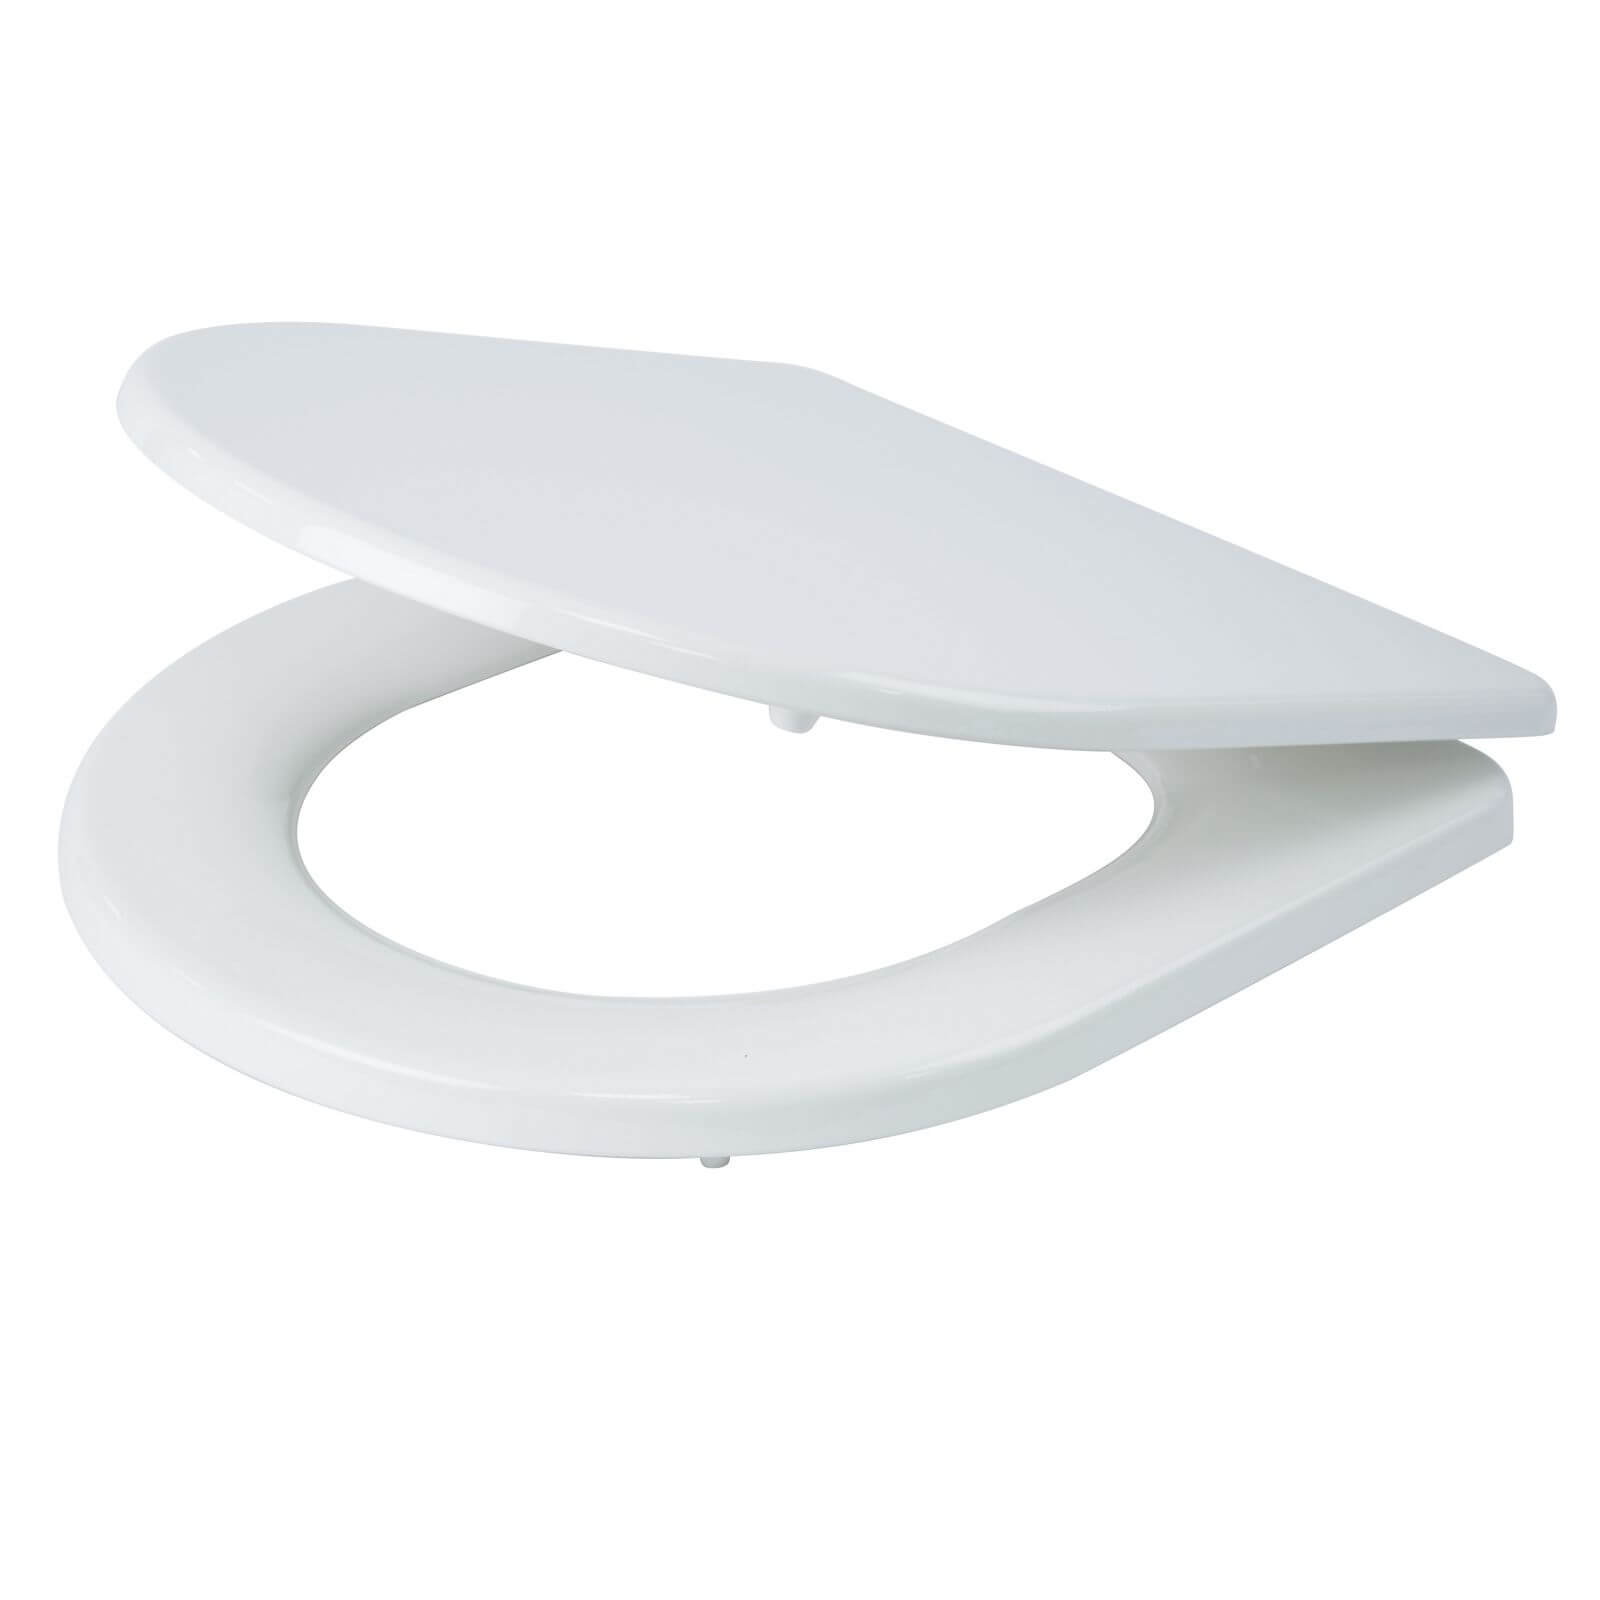 Croydex Garda D-Shaped Moulded Wood Toilet Seat - White